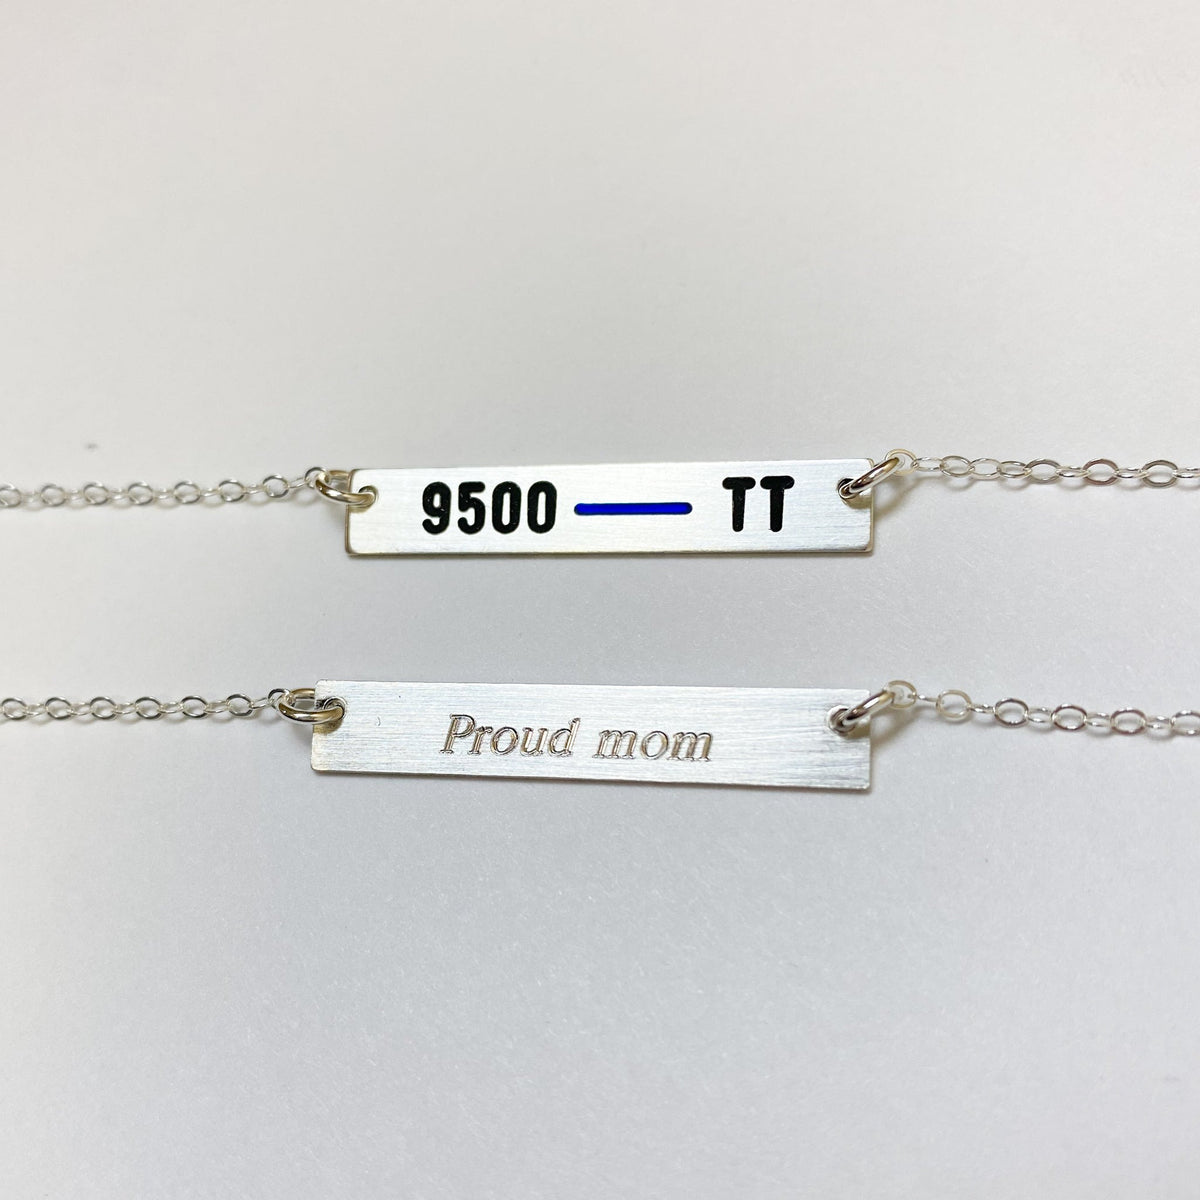 Thin Blue Line Necklace with 2 Badge Numbers